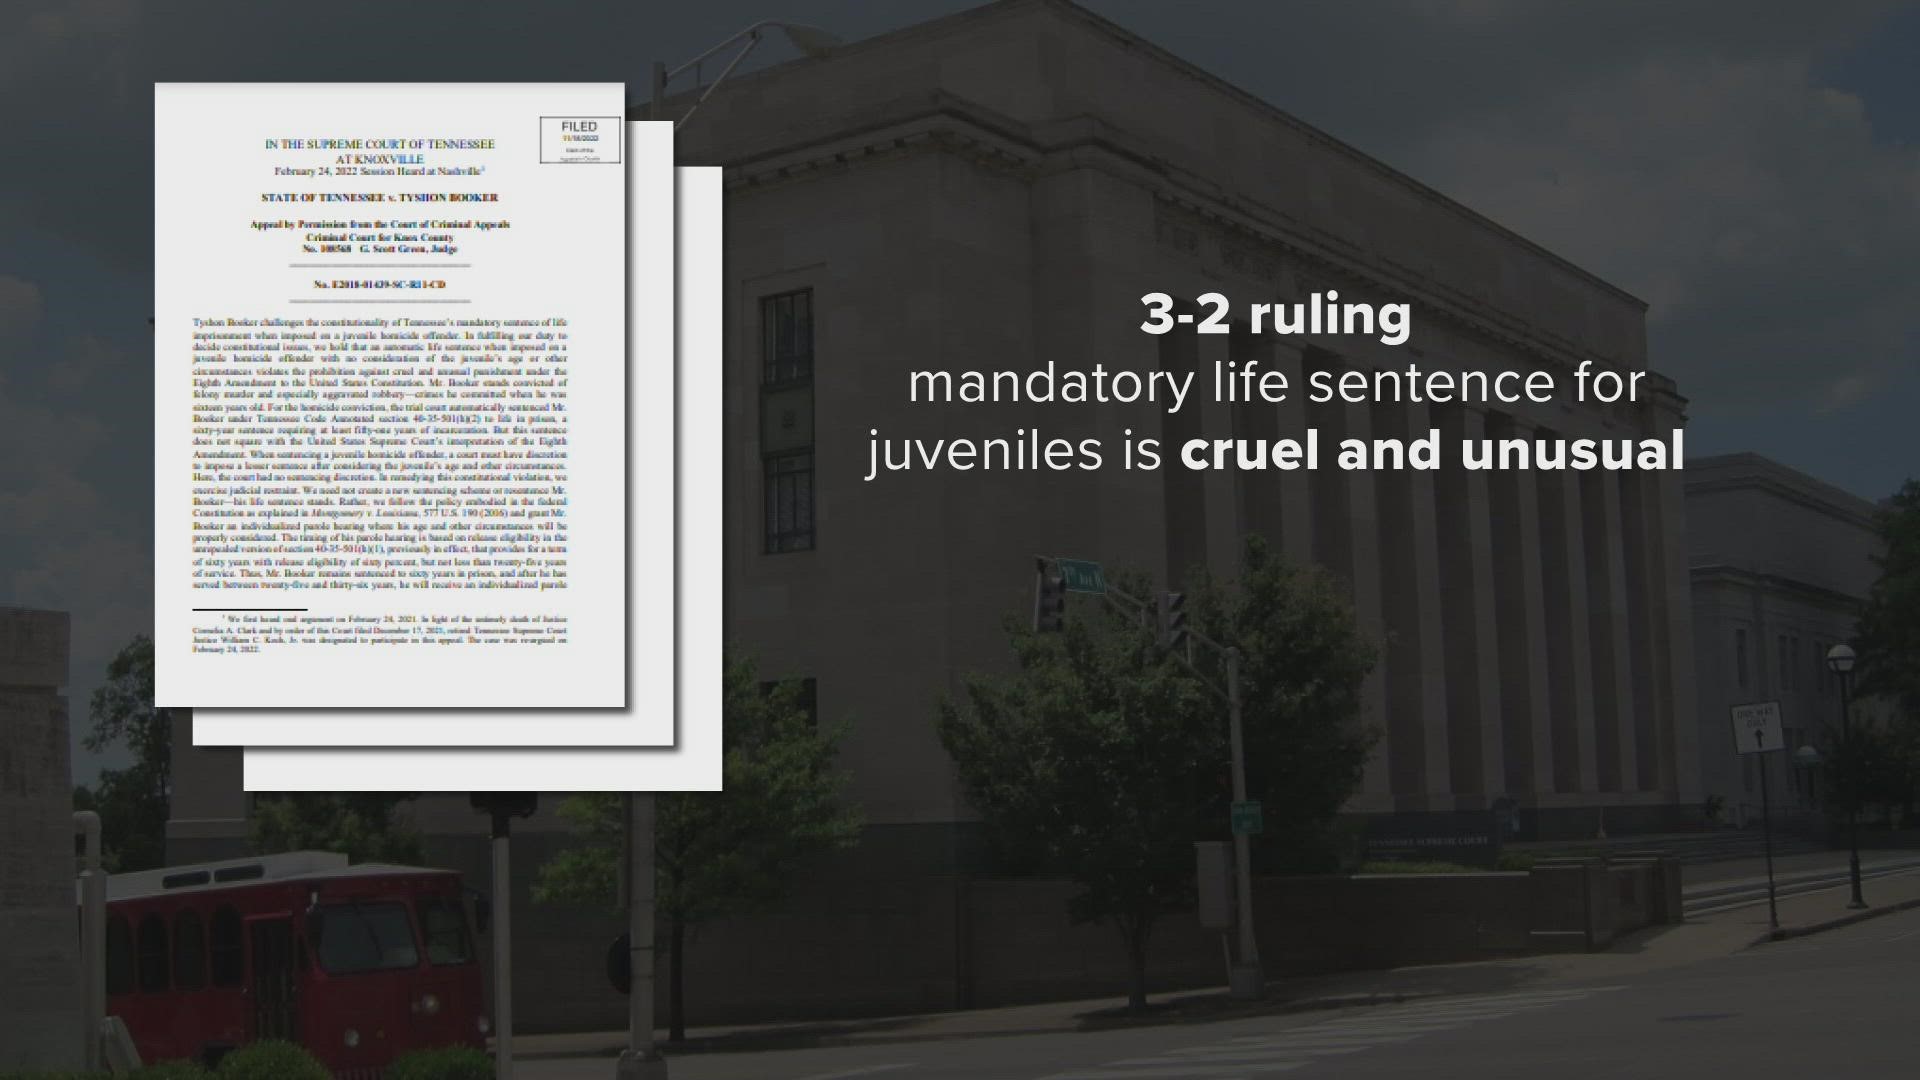 The court said that a mandatory life sentence for juveniles is cruel and unusual punishment.